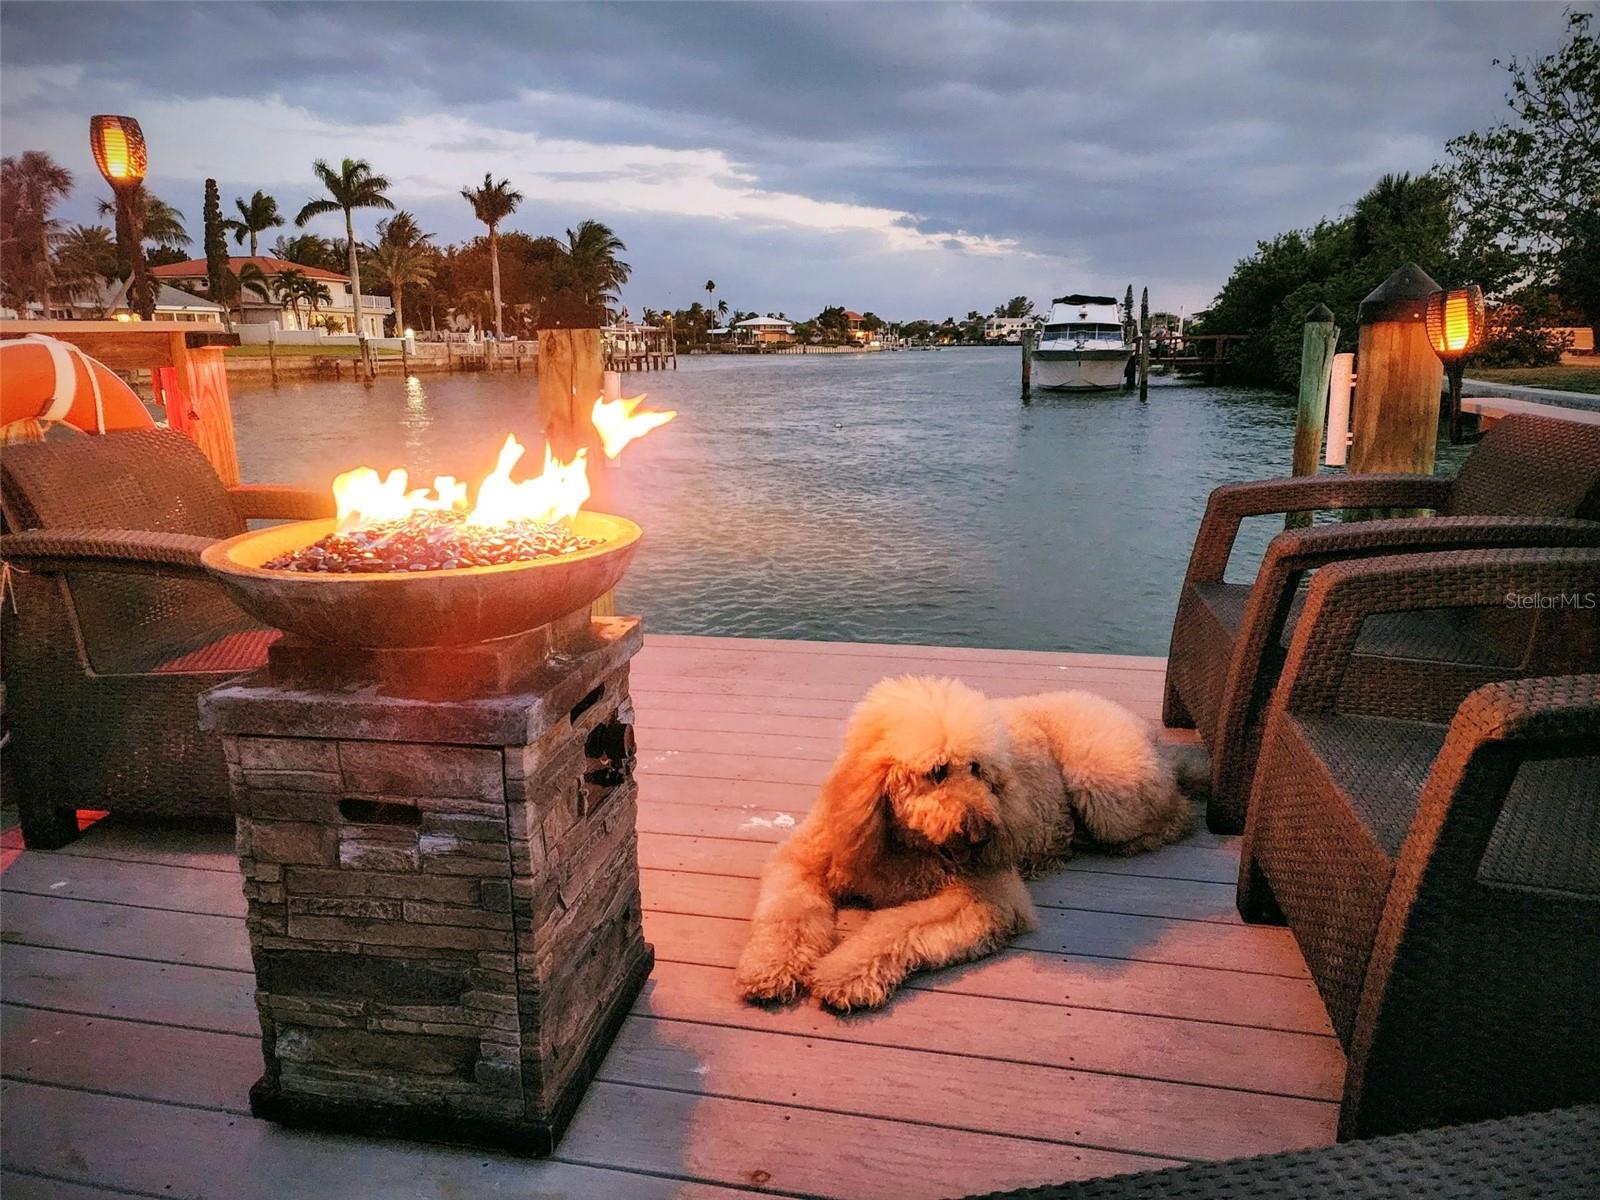 Enjoy Sunsets from your Private Dock with your Friends, Family and Furry Ones.